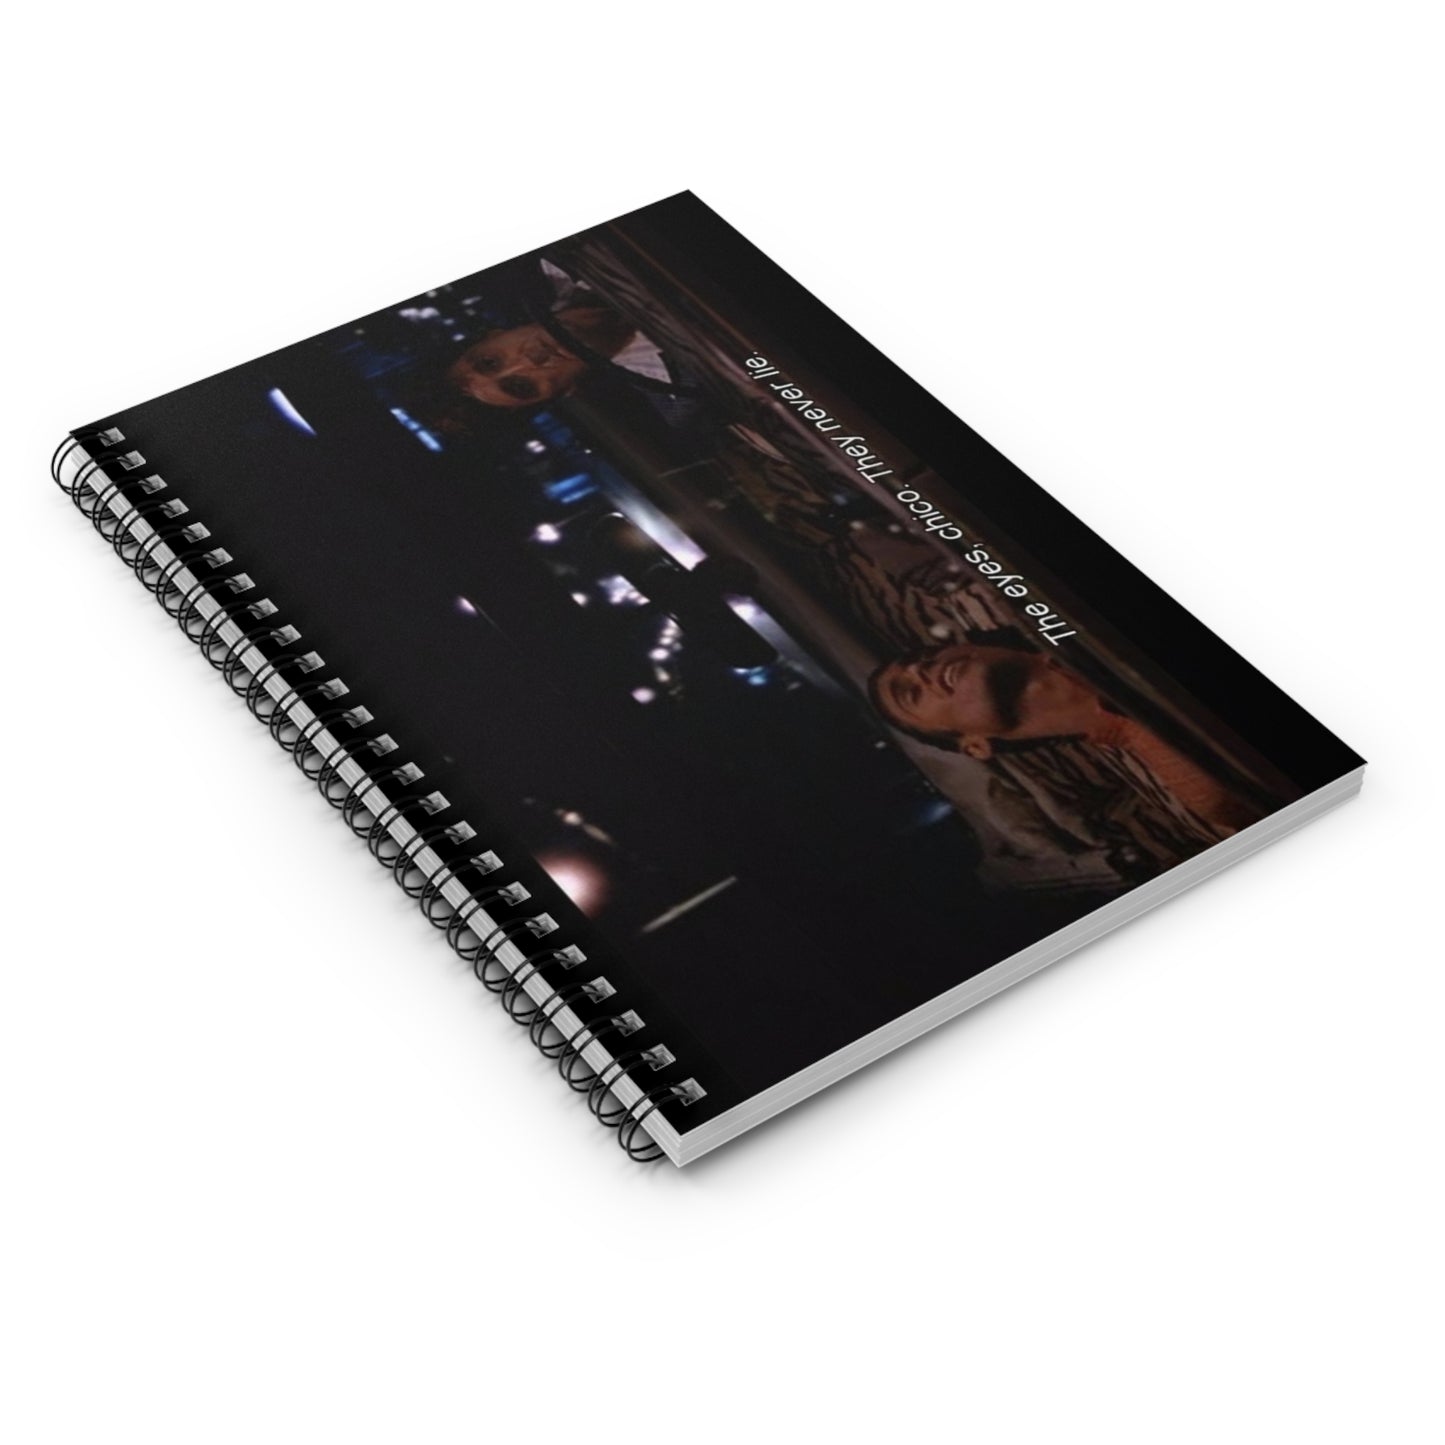 Scarface Spiral Notebook - Ruled Line